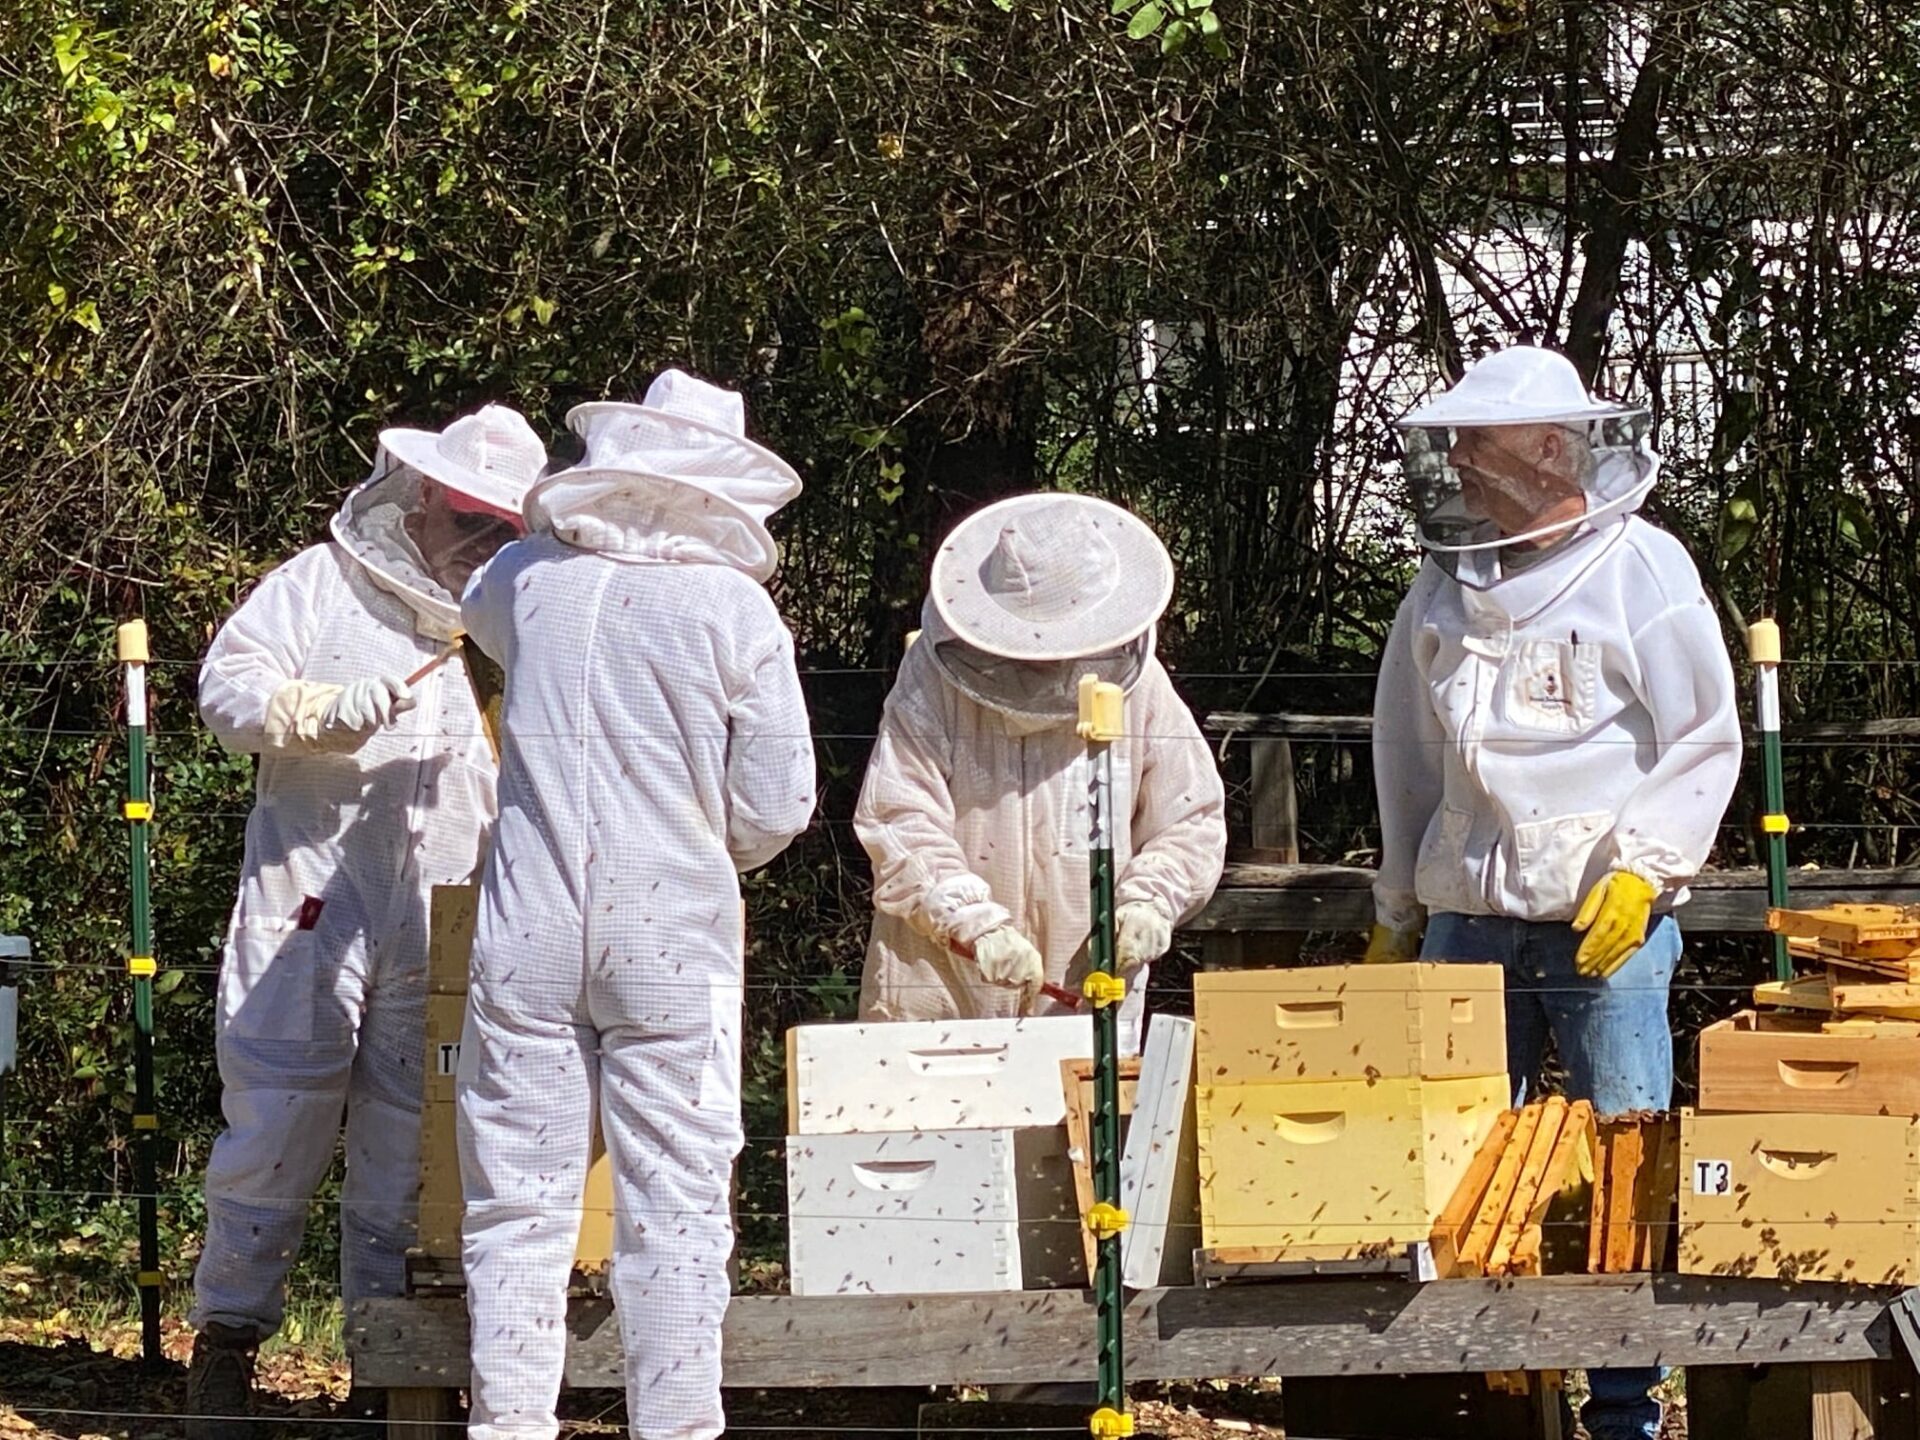 Beekeepers making honey at the farm